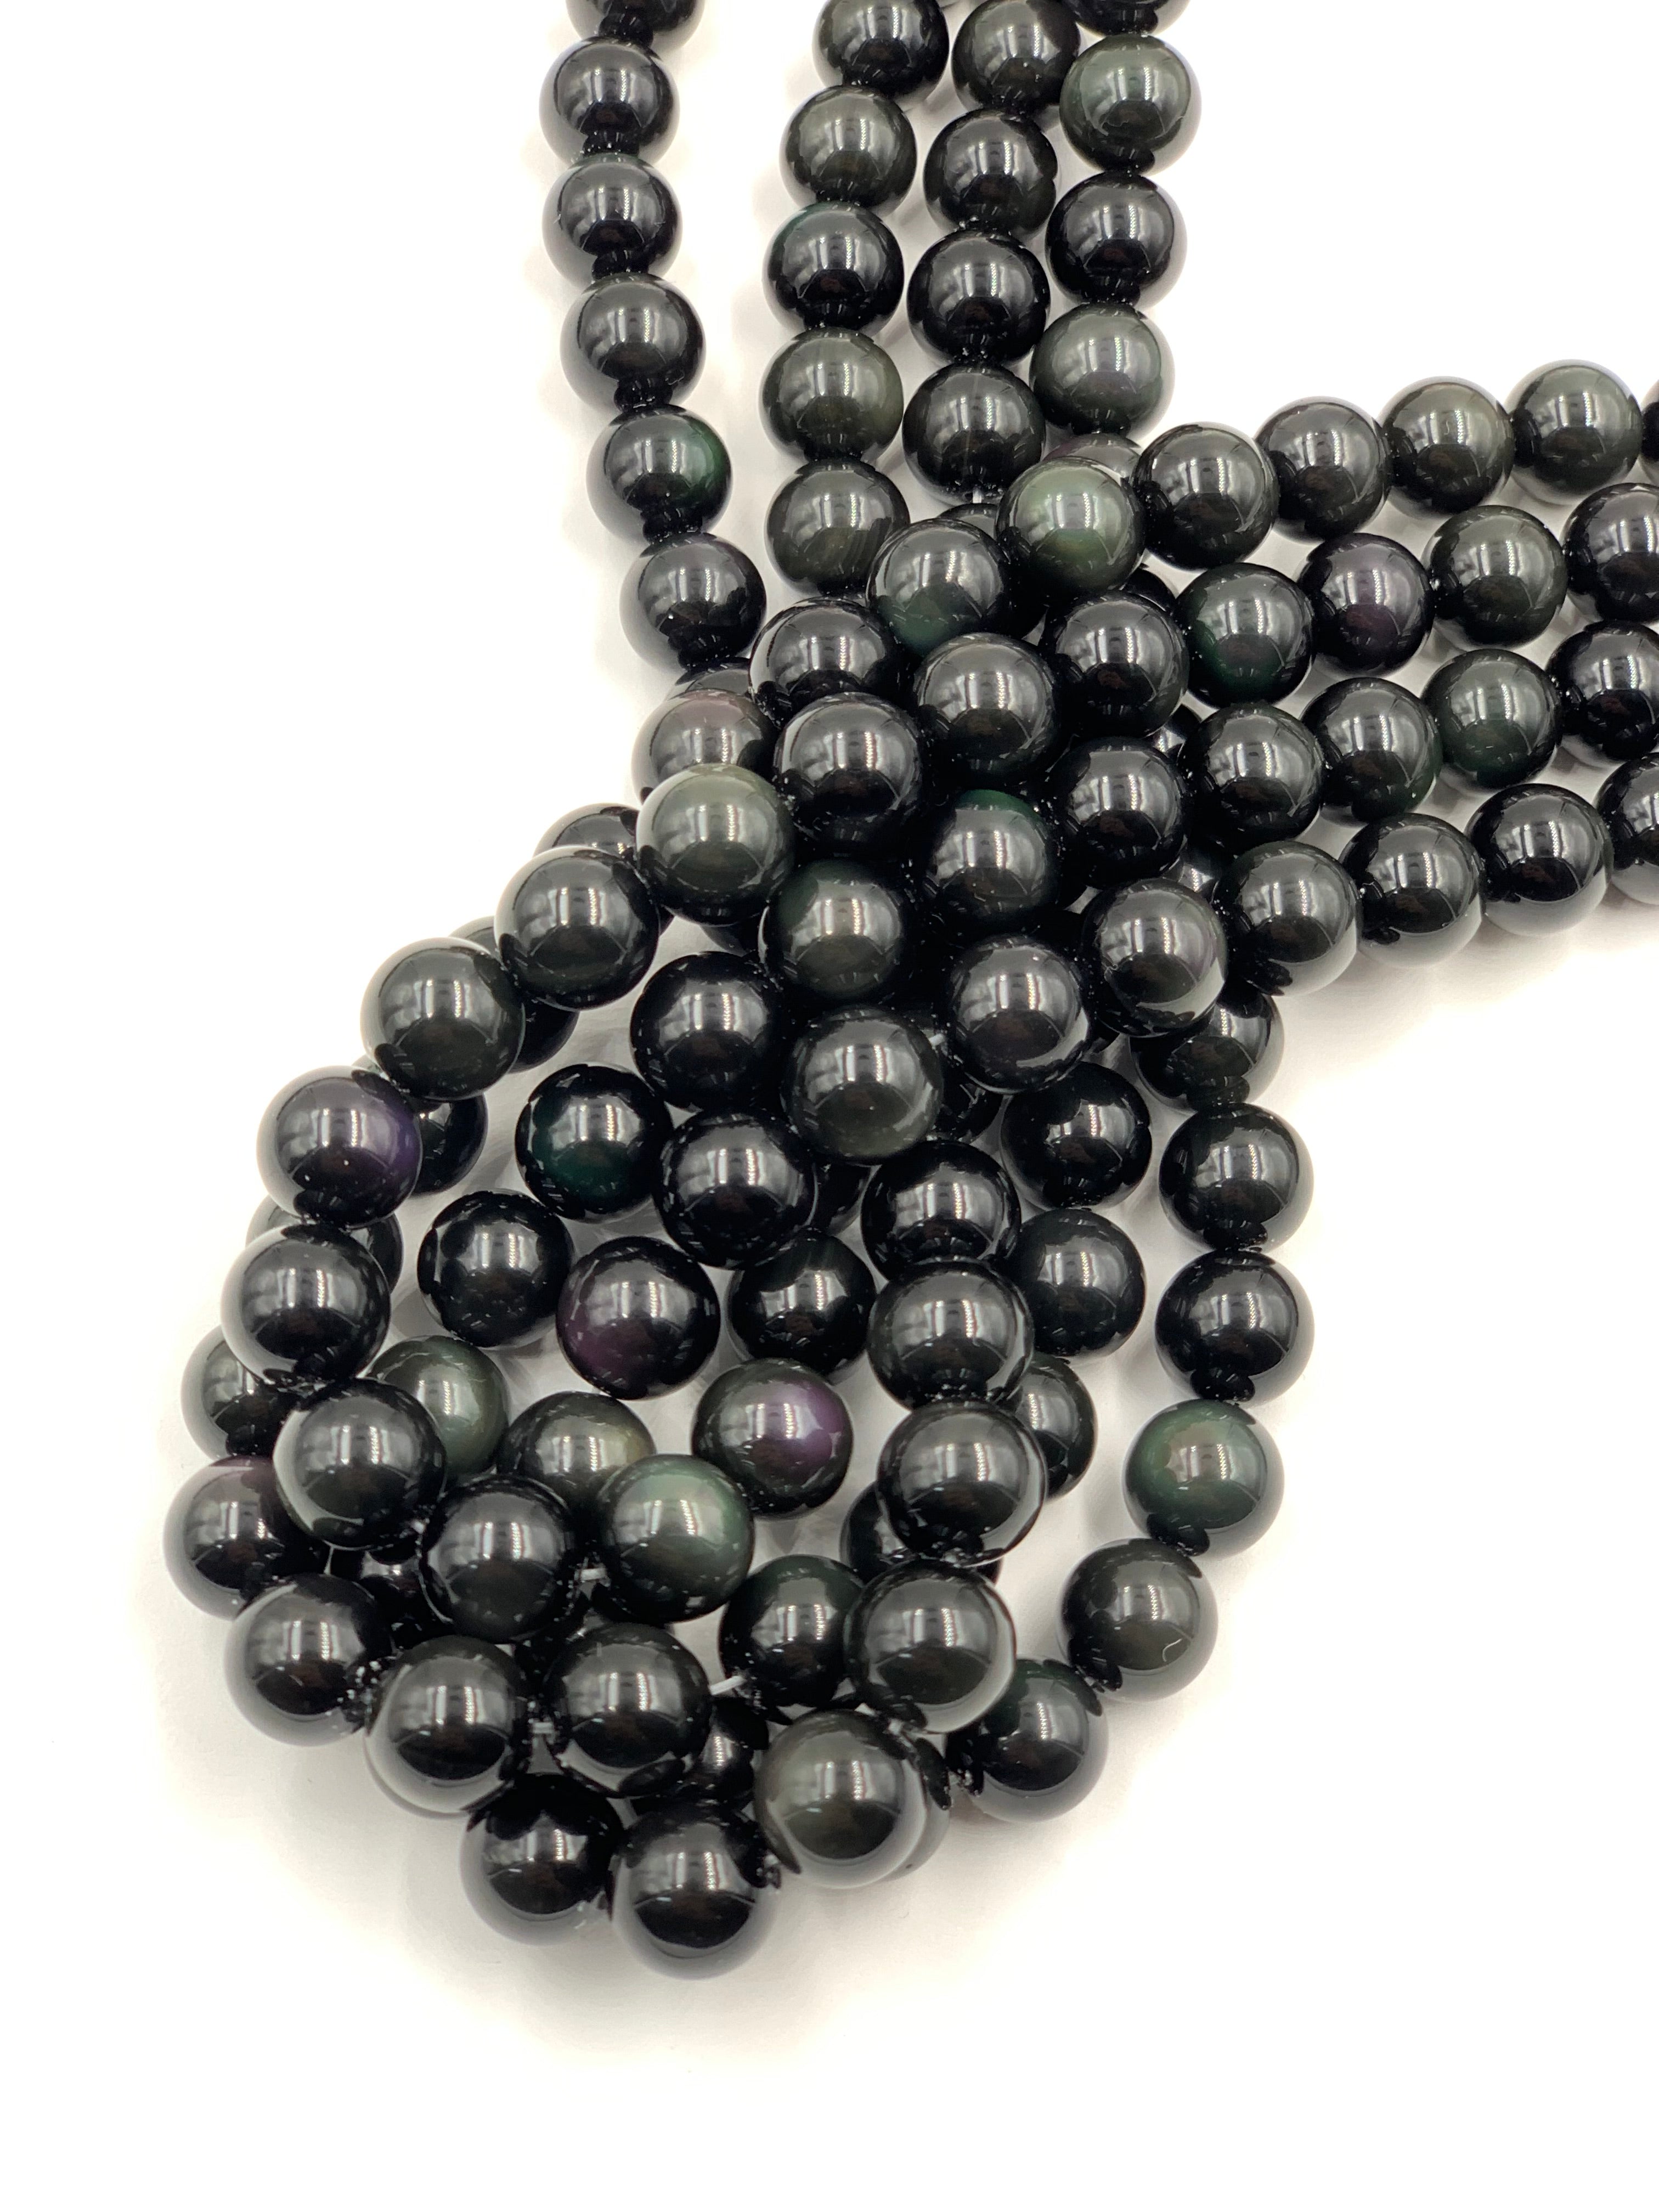 10 MM Rainbow Black Obsidian Smooth Round Beads 15 Inches Strand